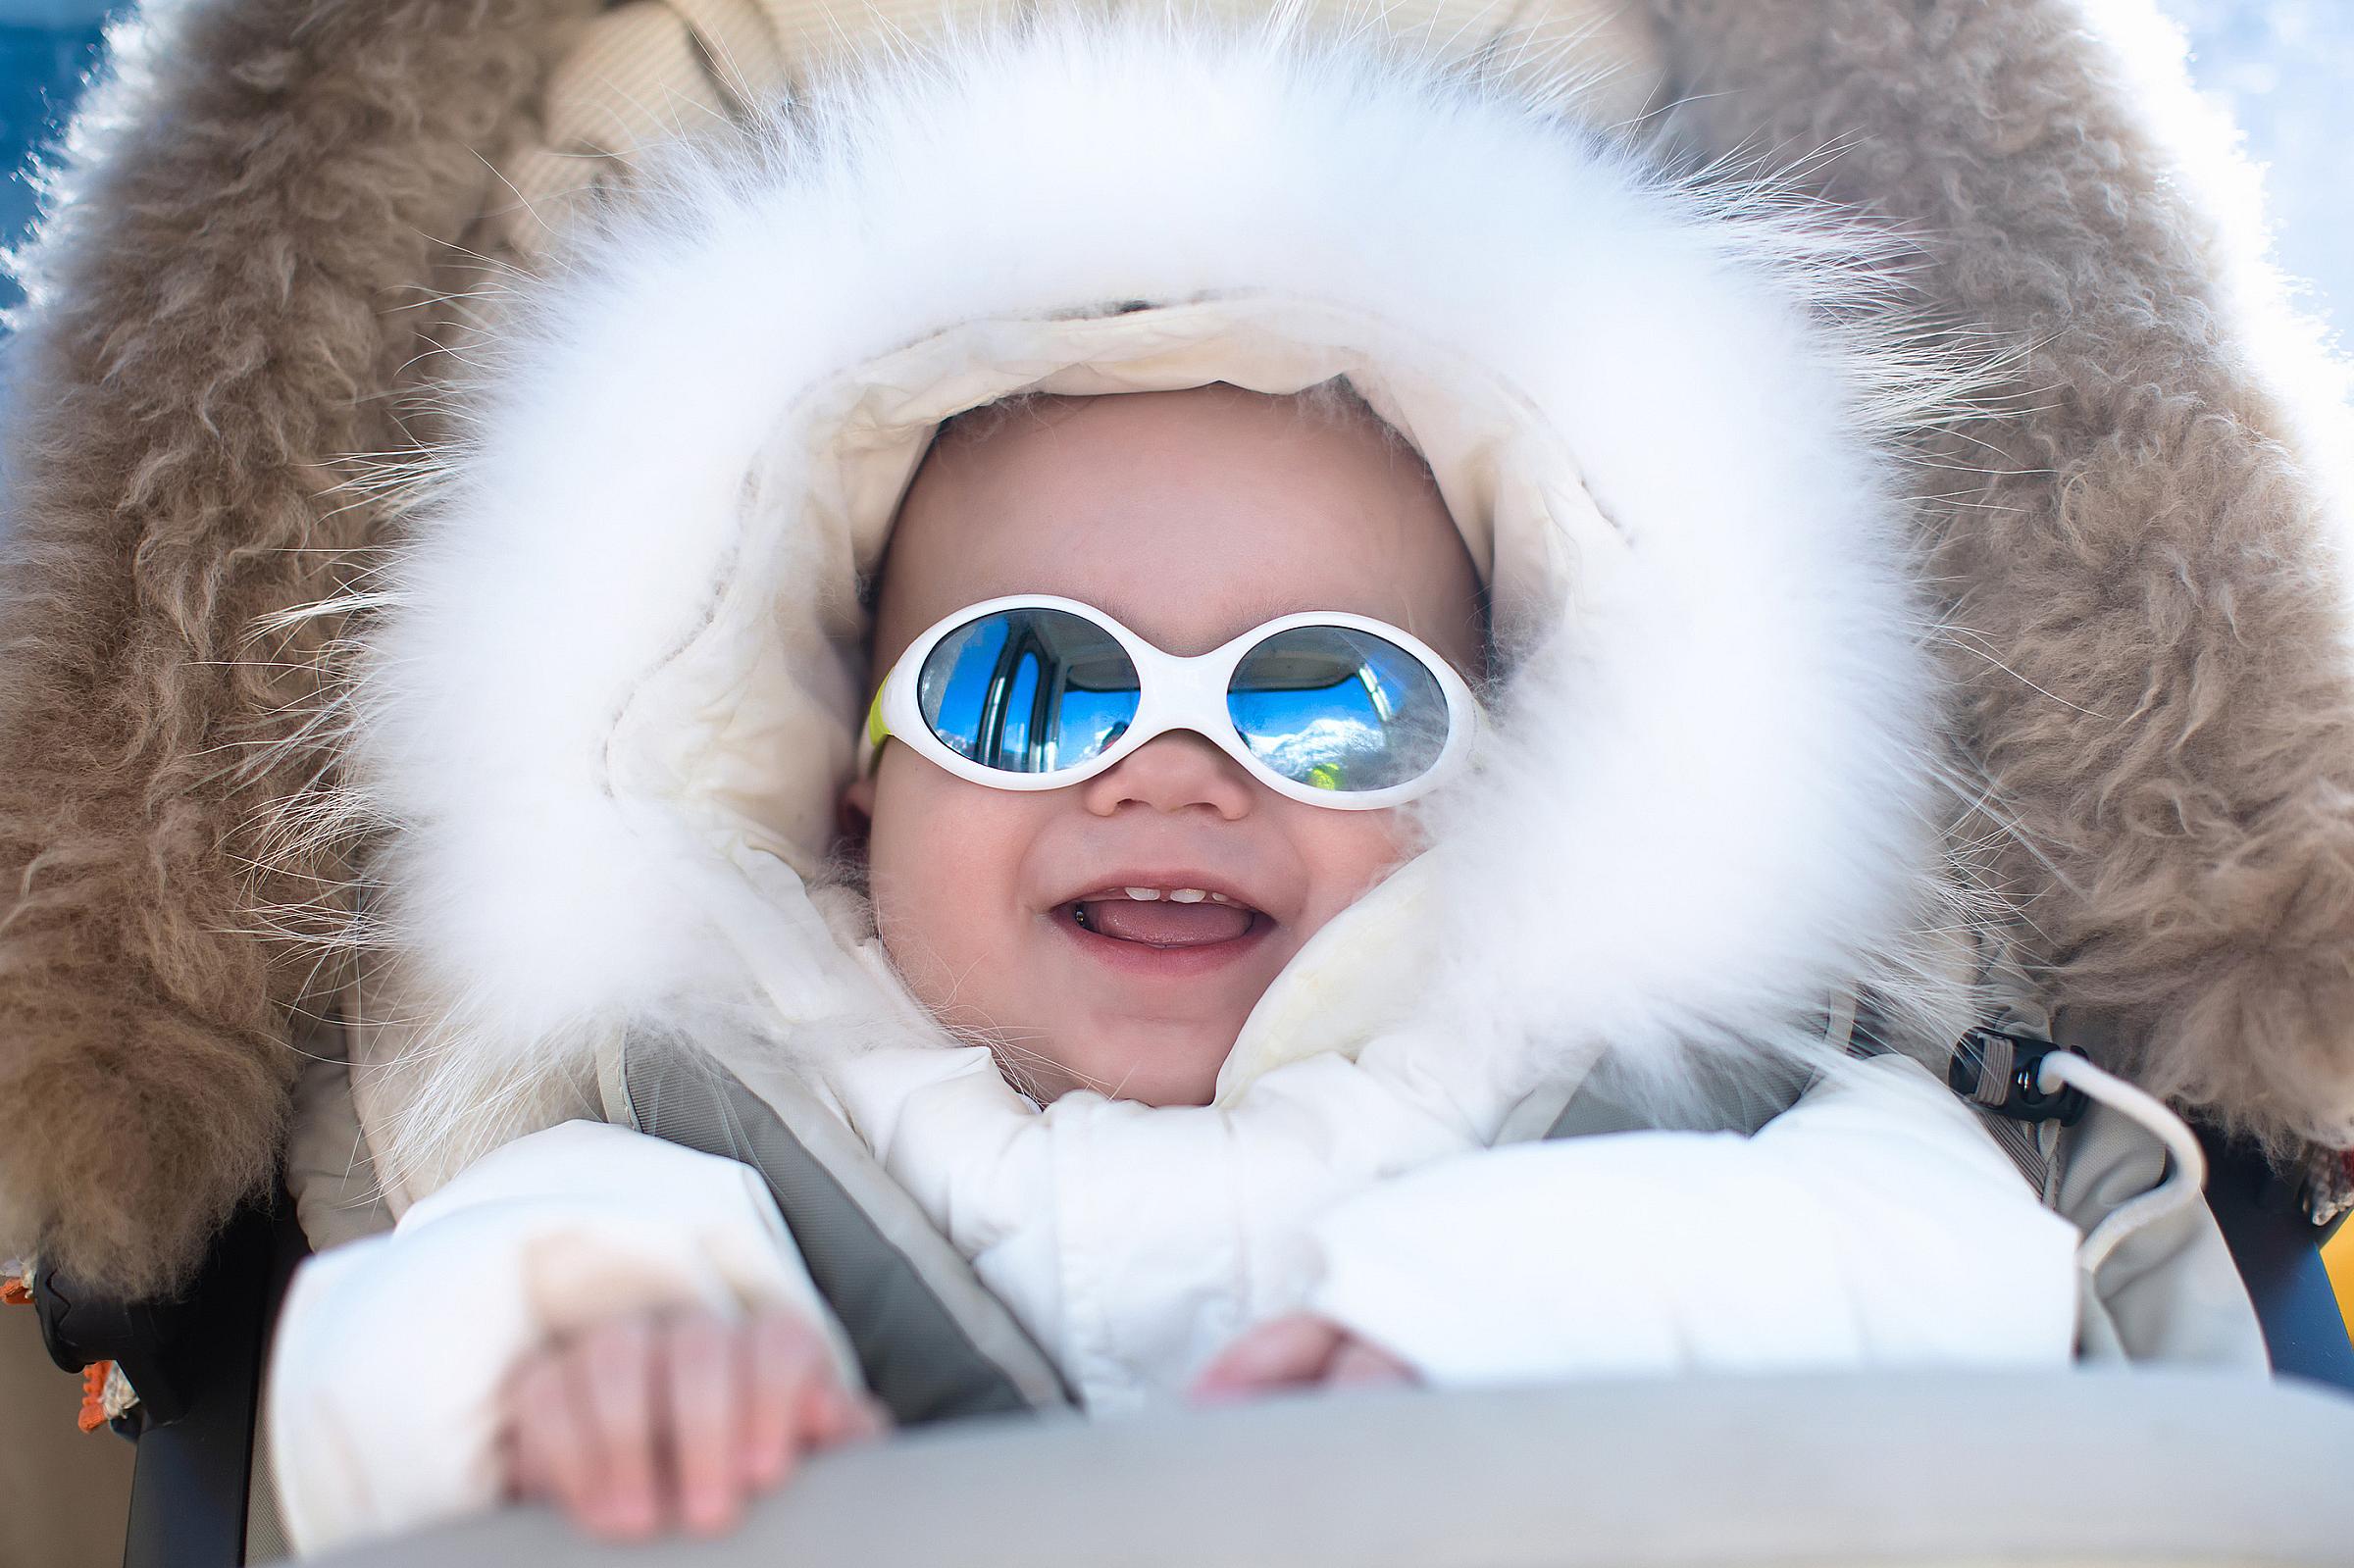 Baby in a snowsuit wearing sunglasses